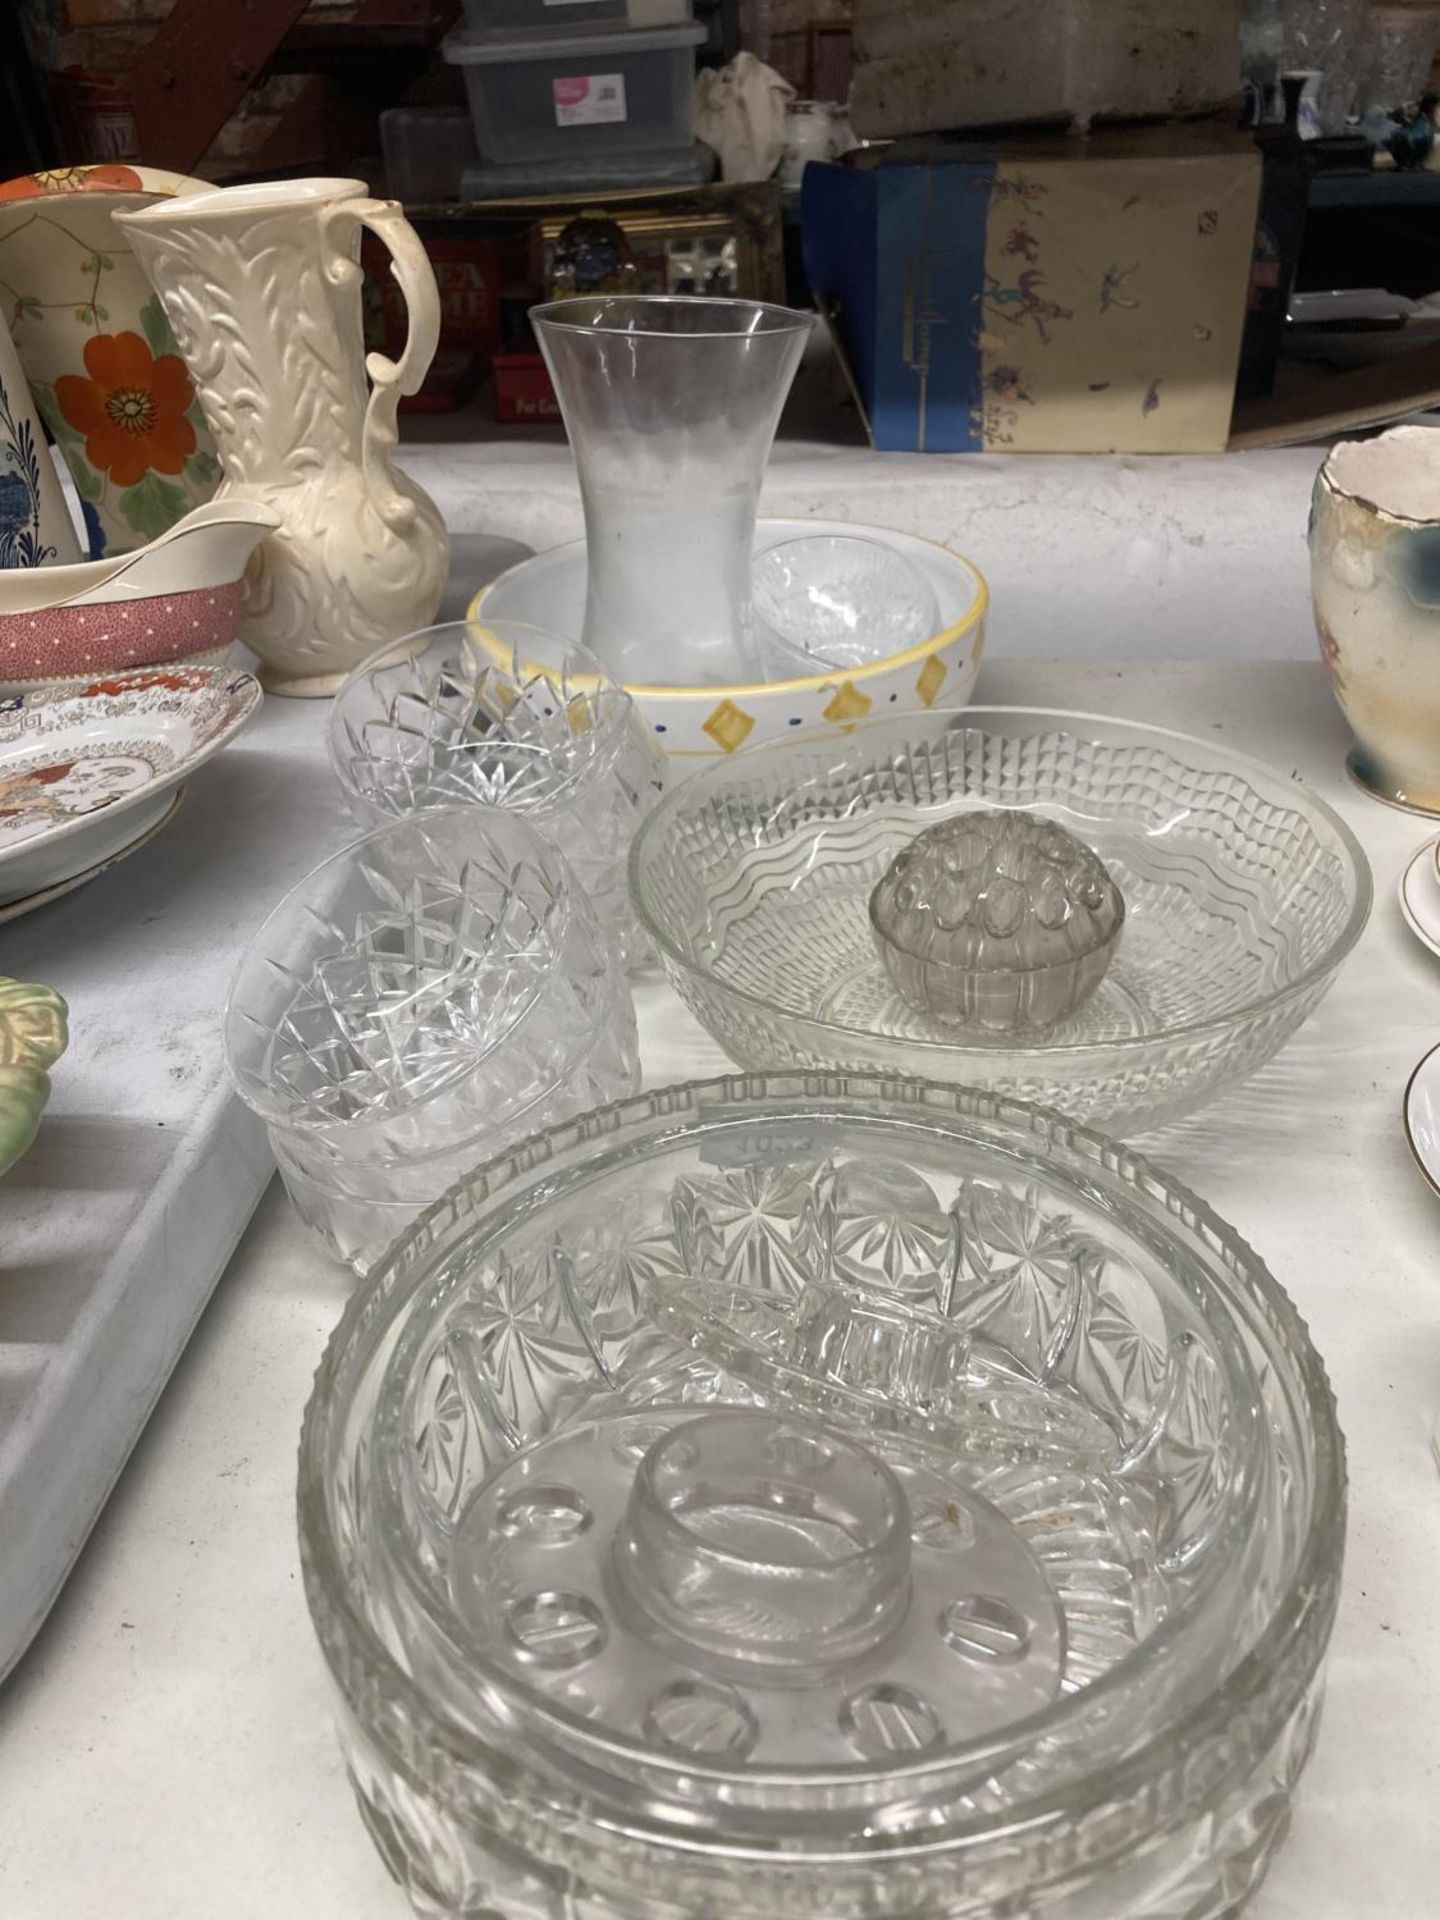 A LARGE COLLECTION OF GLASSWARE TO INCLIUDE BOWLS, FLOWER ARRANGING FROGS, VASES ETC